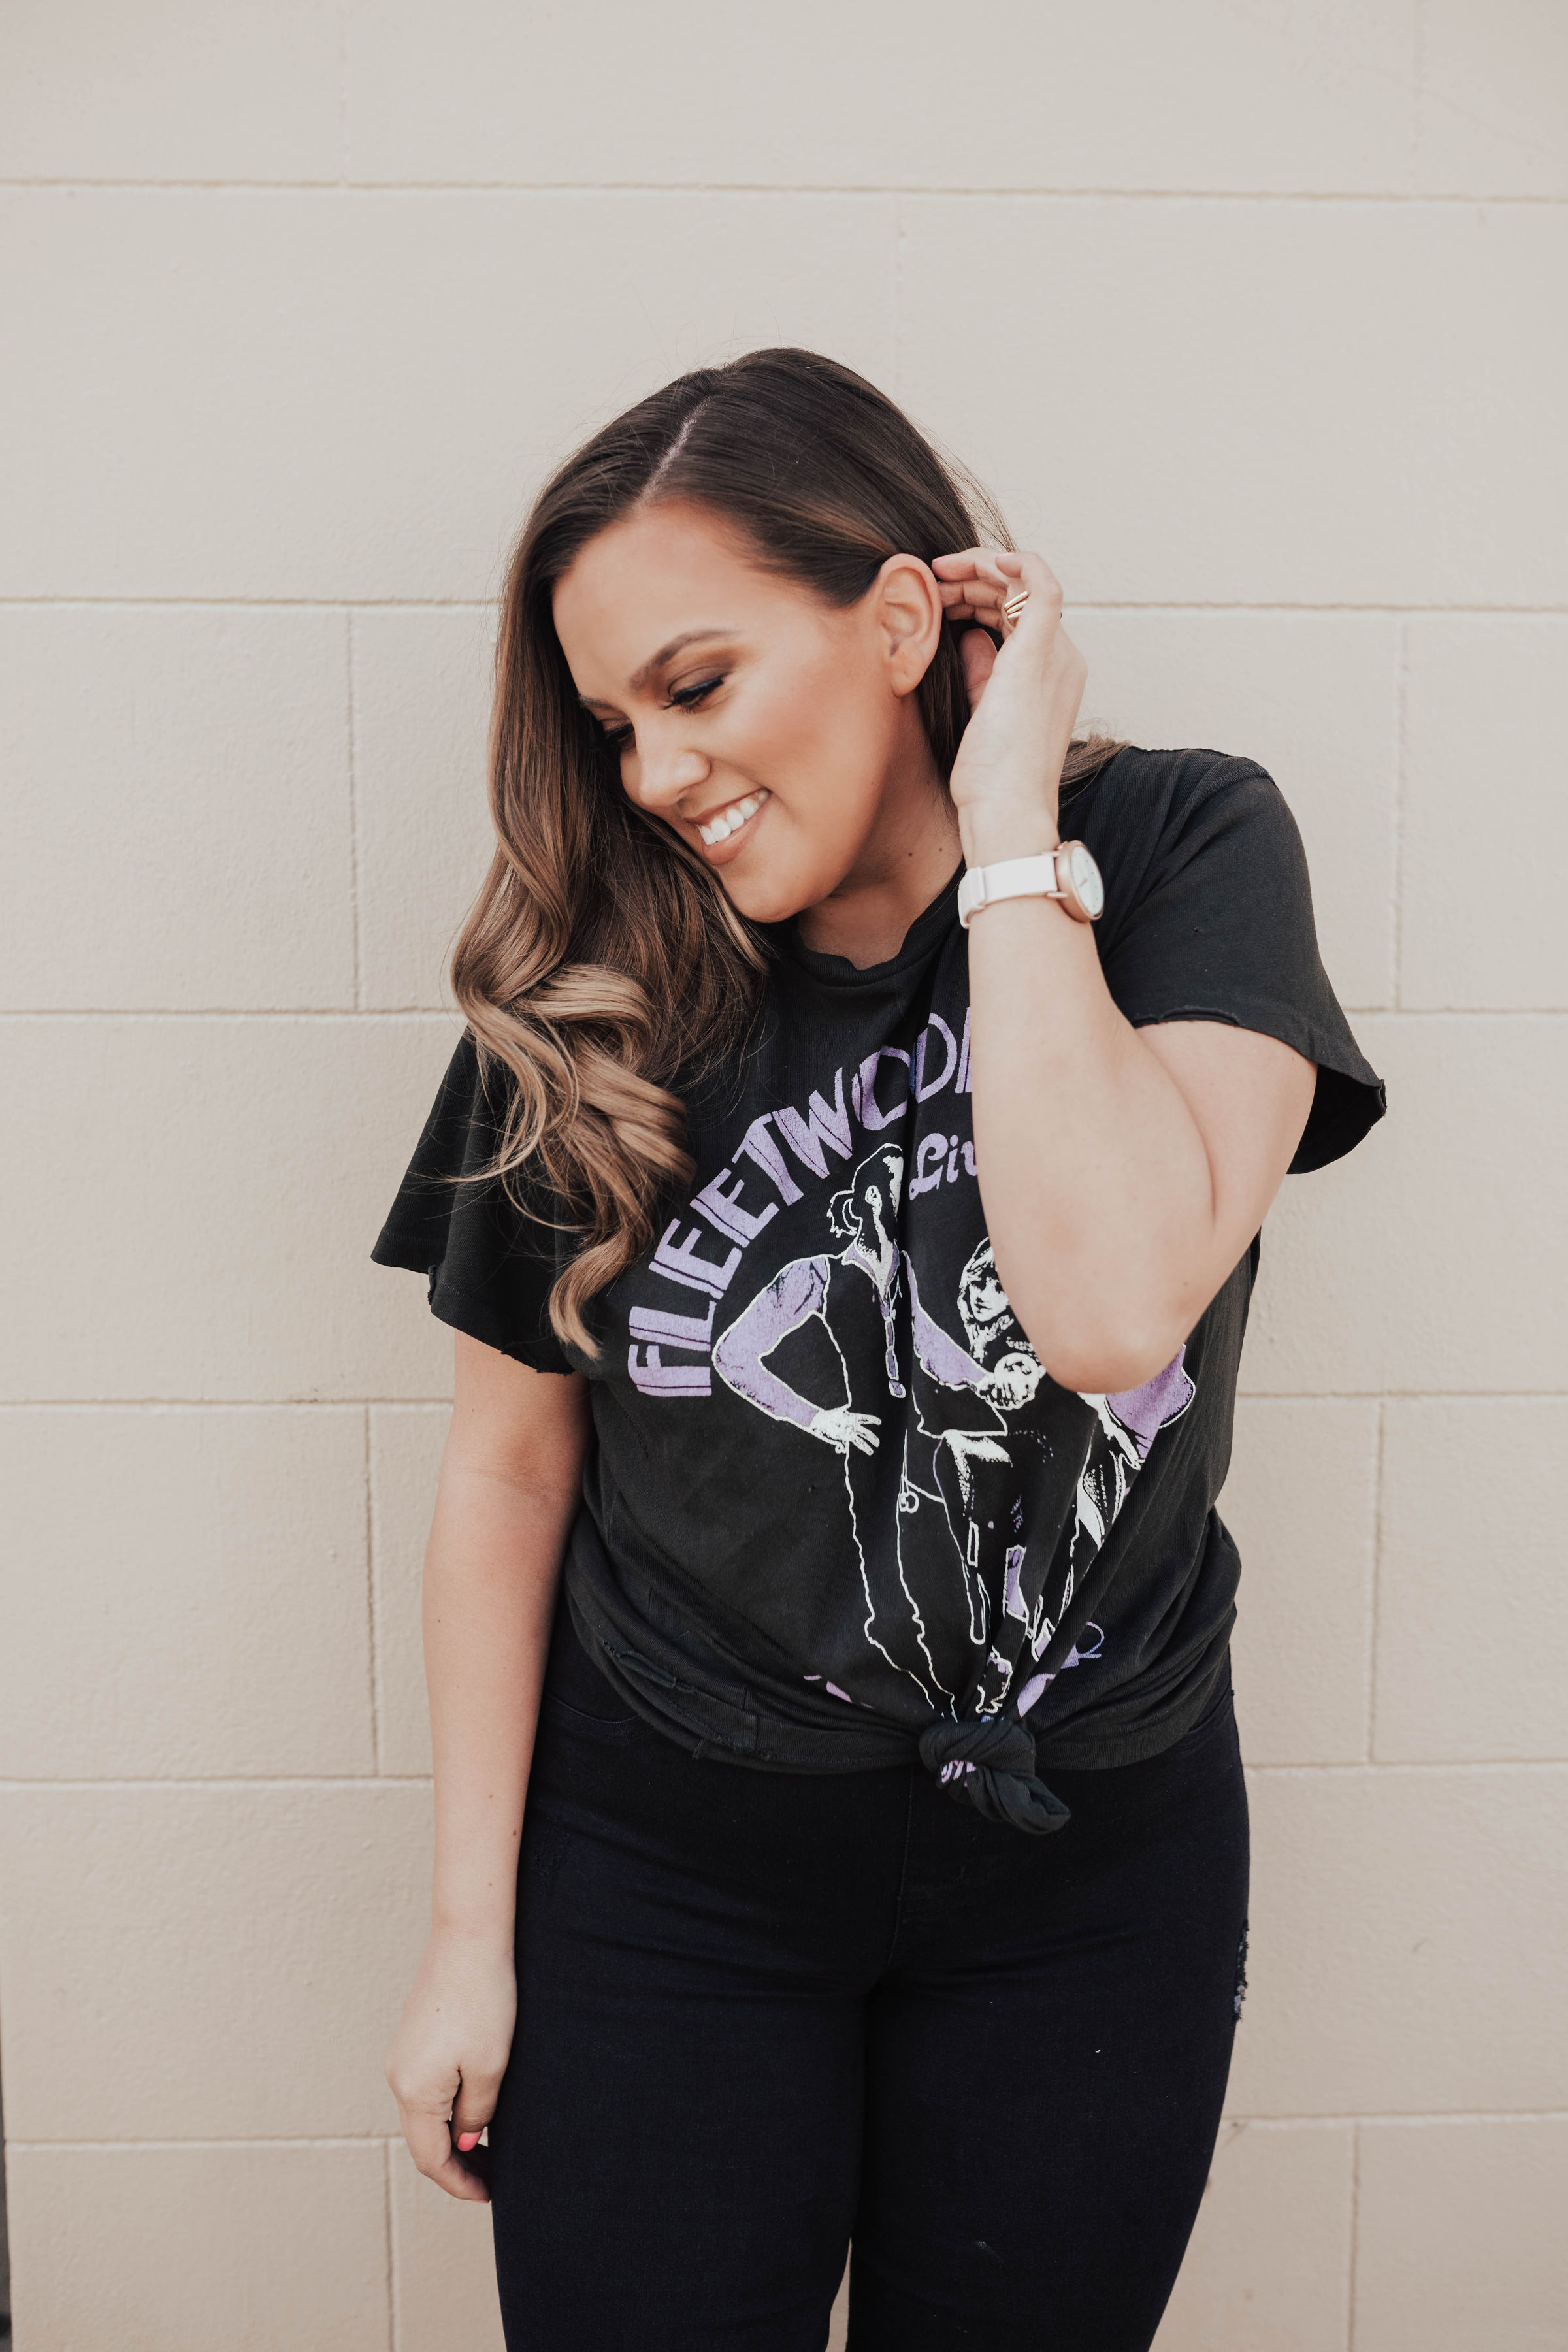 San Francisco blogger, Ashley Zeal from Two Peas in a Prada is sharing her favorite graphic band tees. She is wearing a Fleetwood Mac tee by Madeworn. 